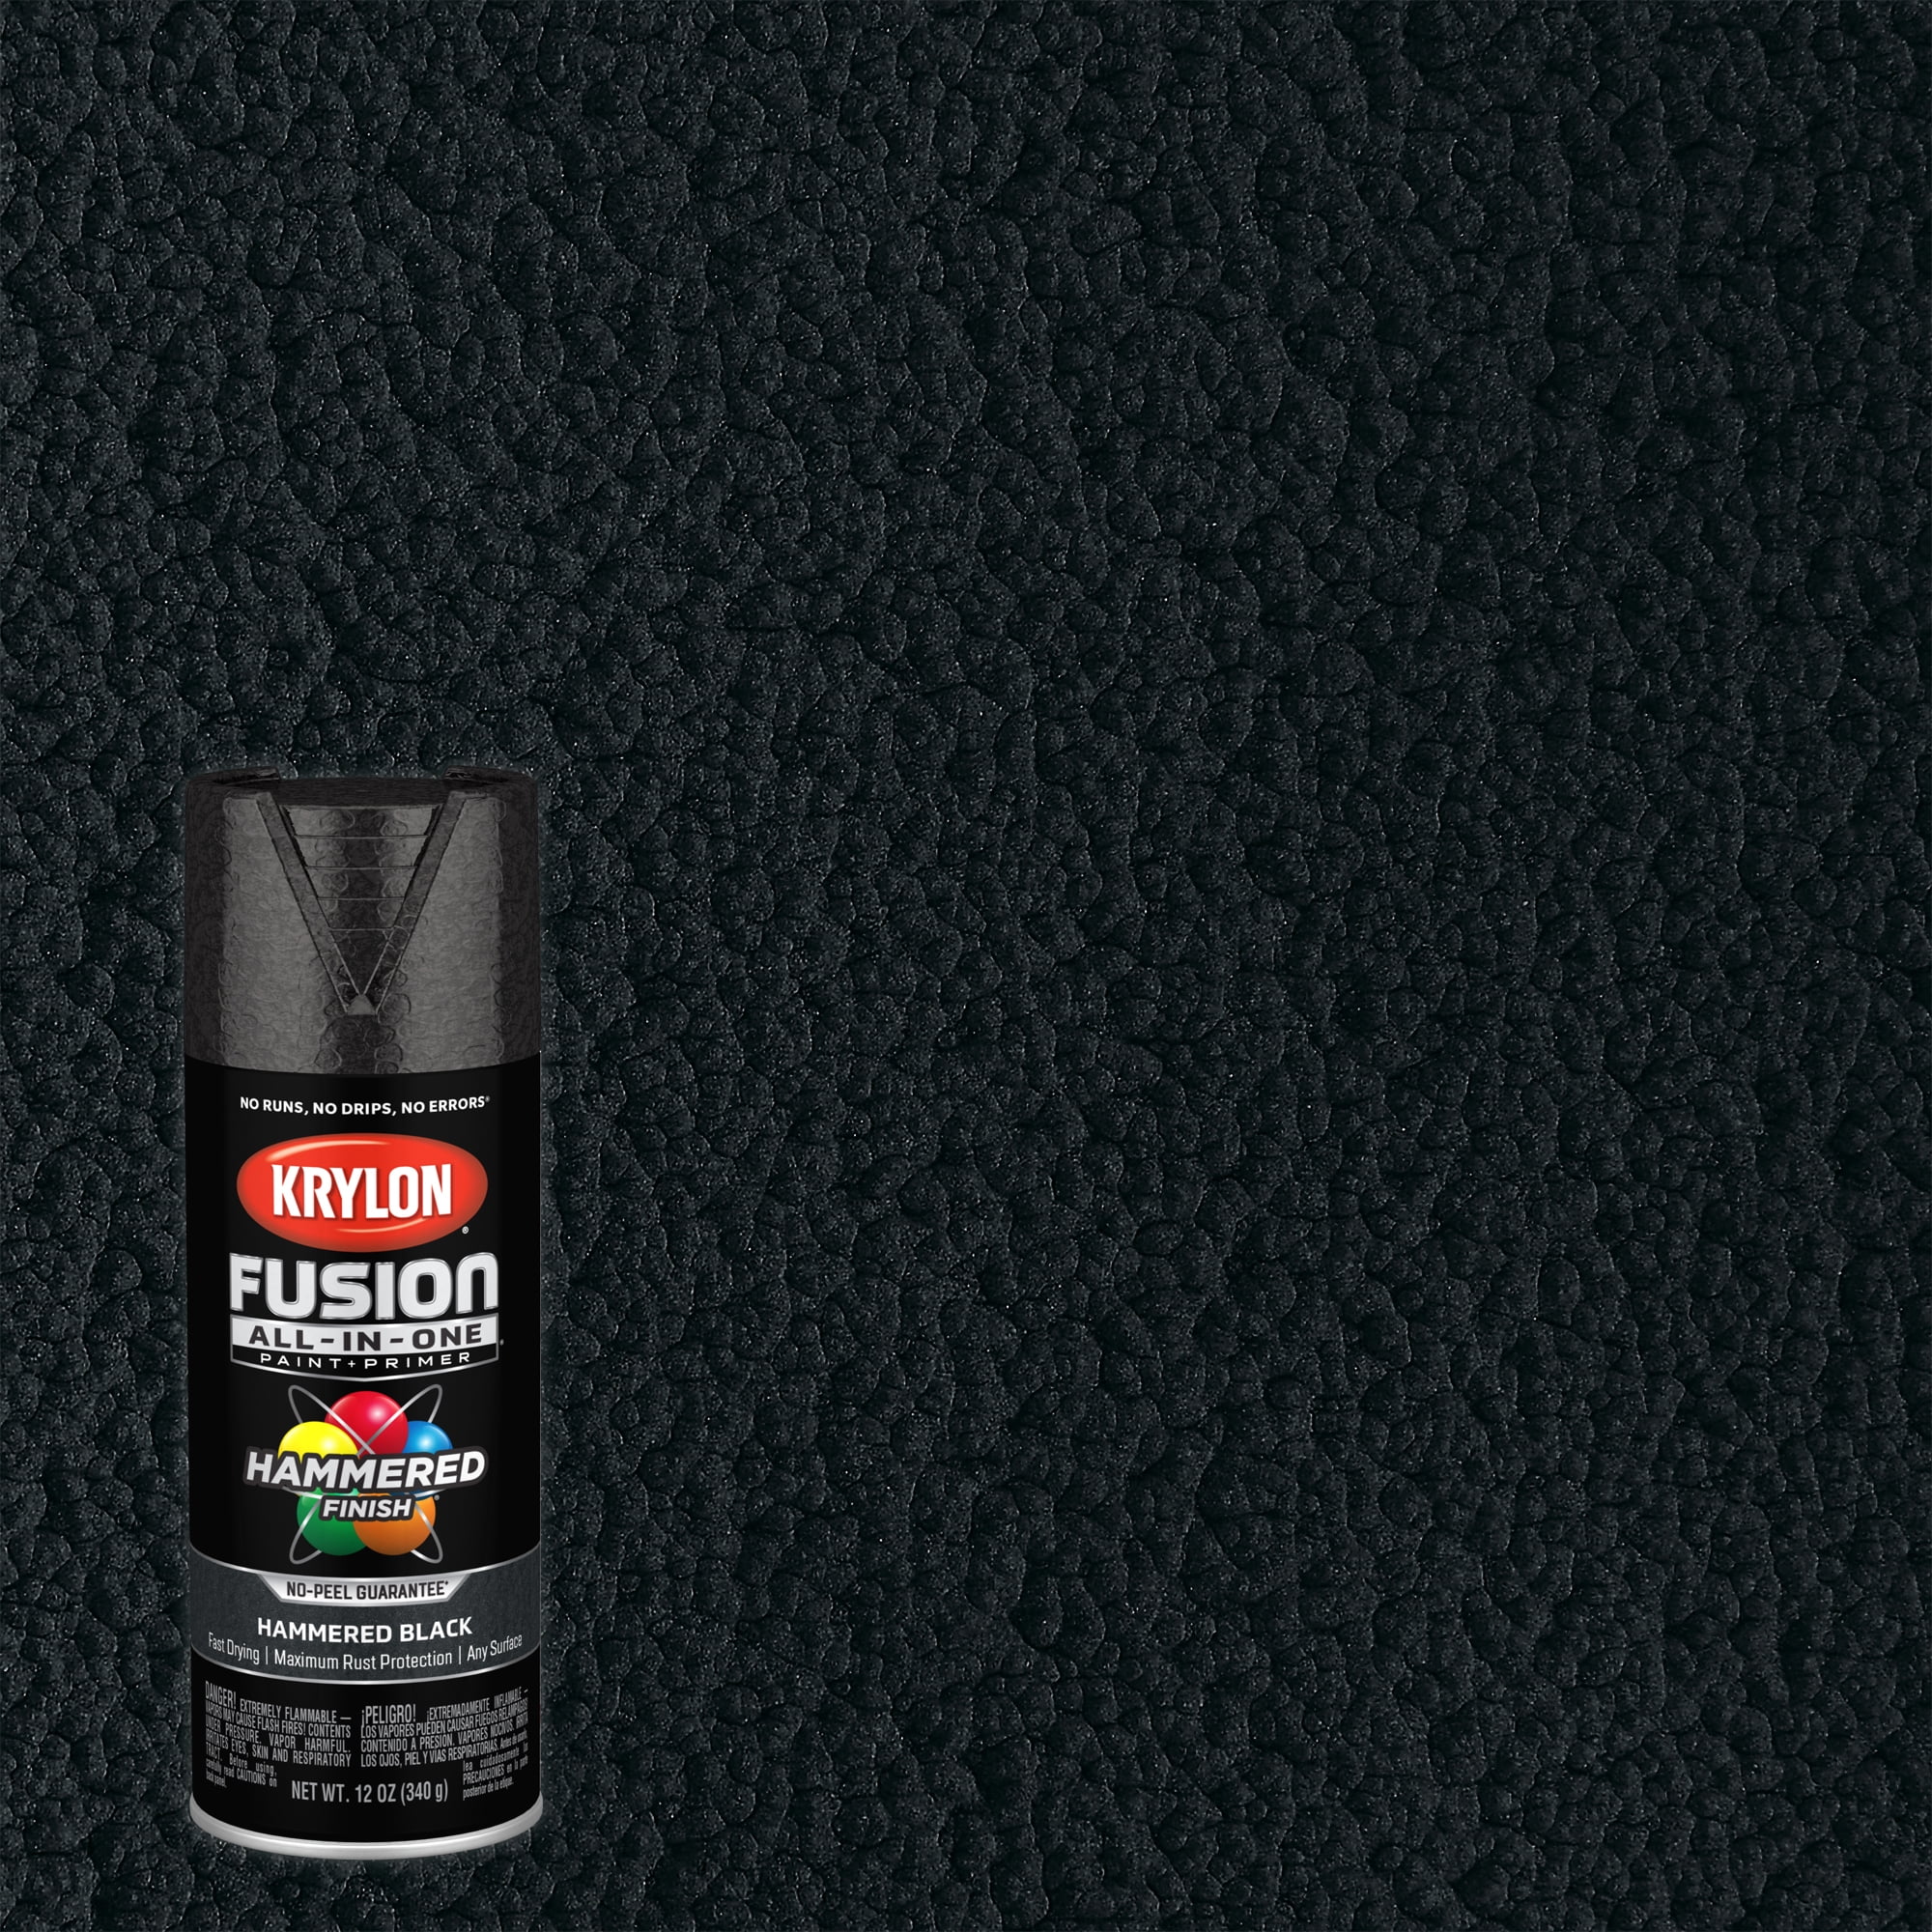 Krylon Fusion All-in-One Spray Paint Hammered, Black, 12 oz.